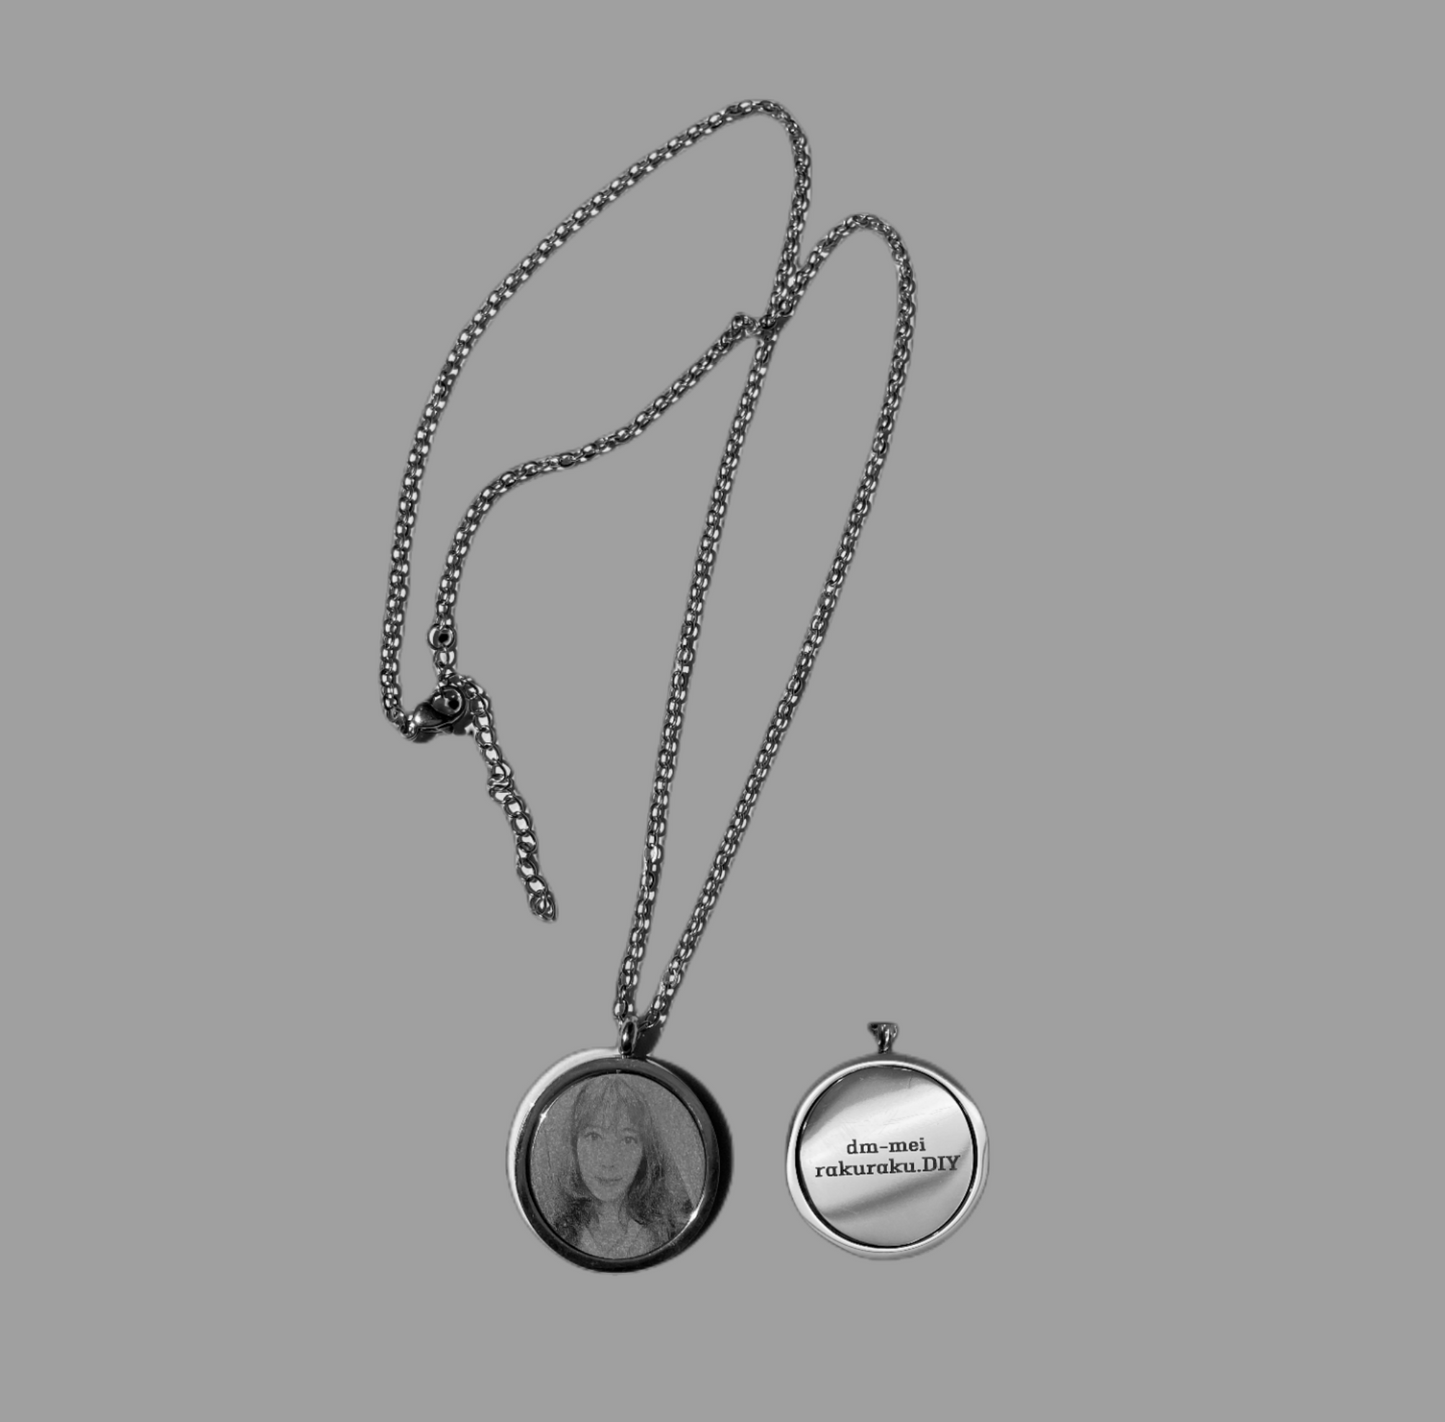 Rotating photo necklace (inner part rotates)